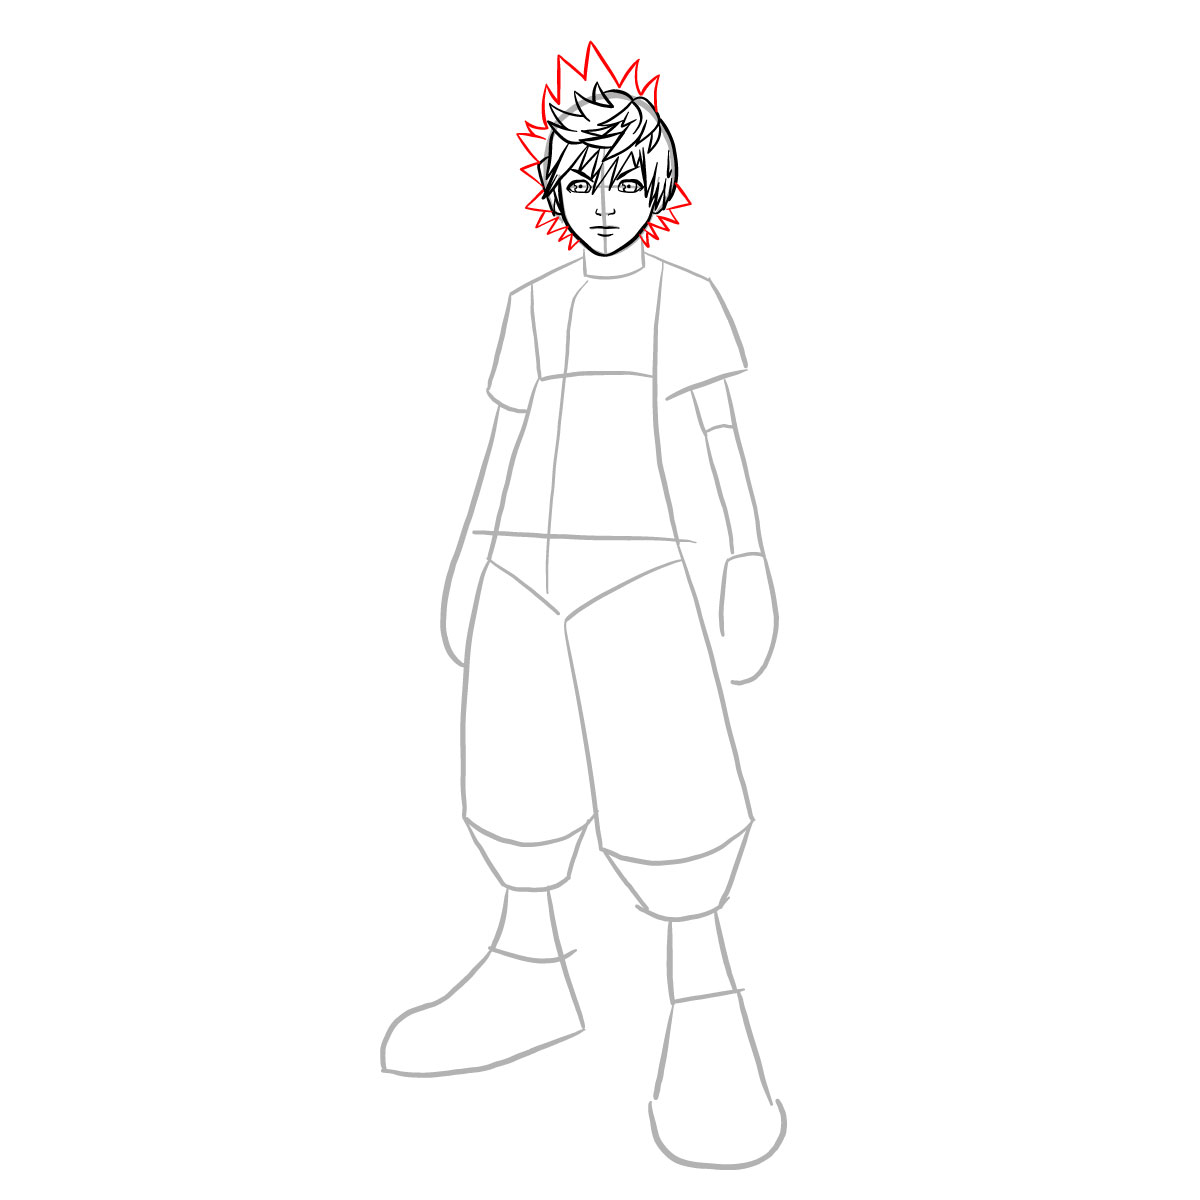 How to draw Ventus - step 16